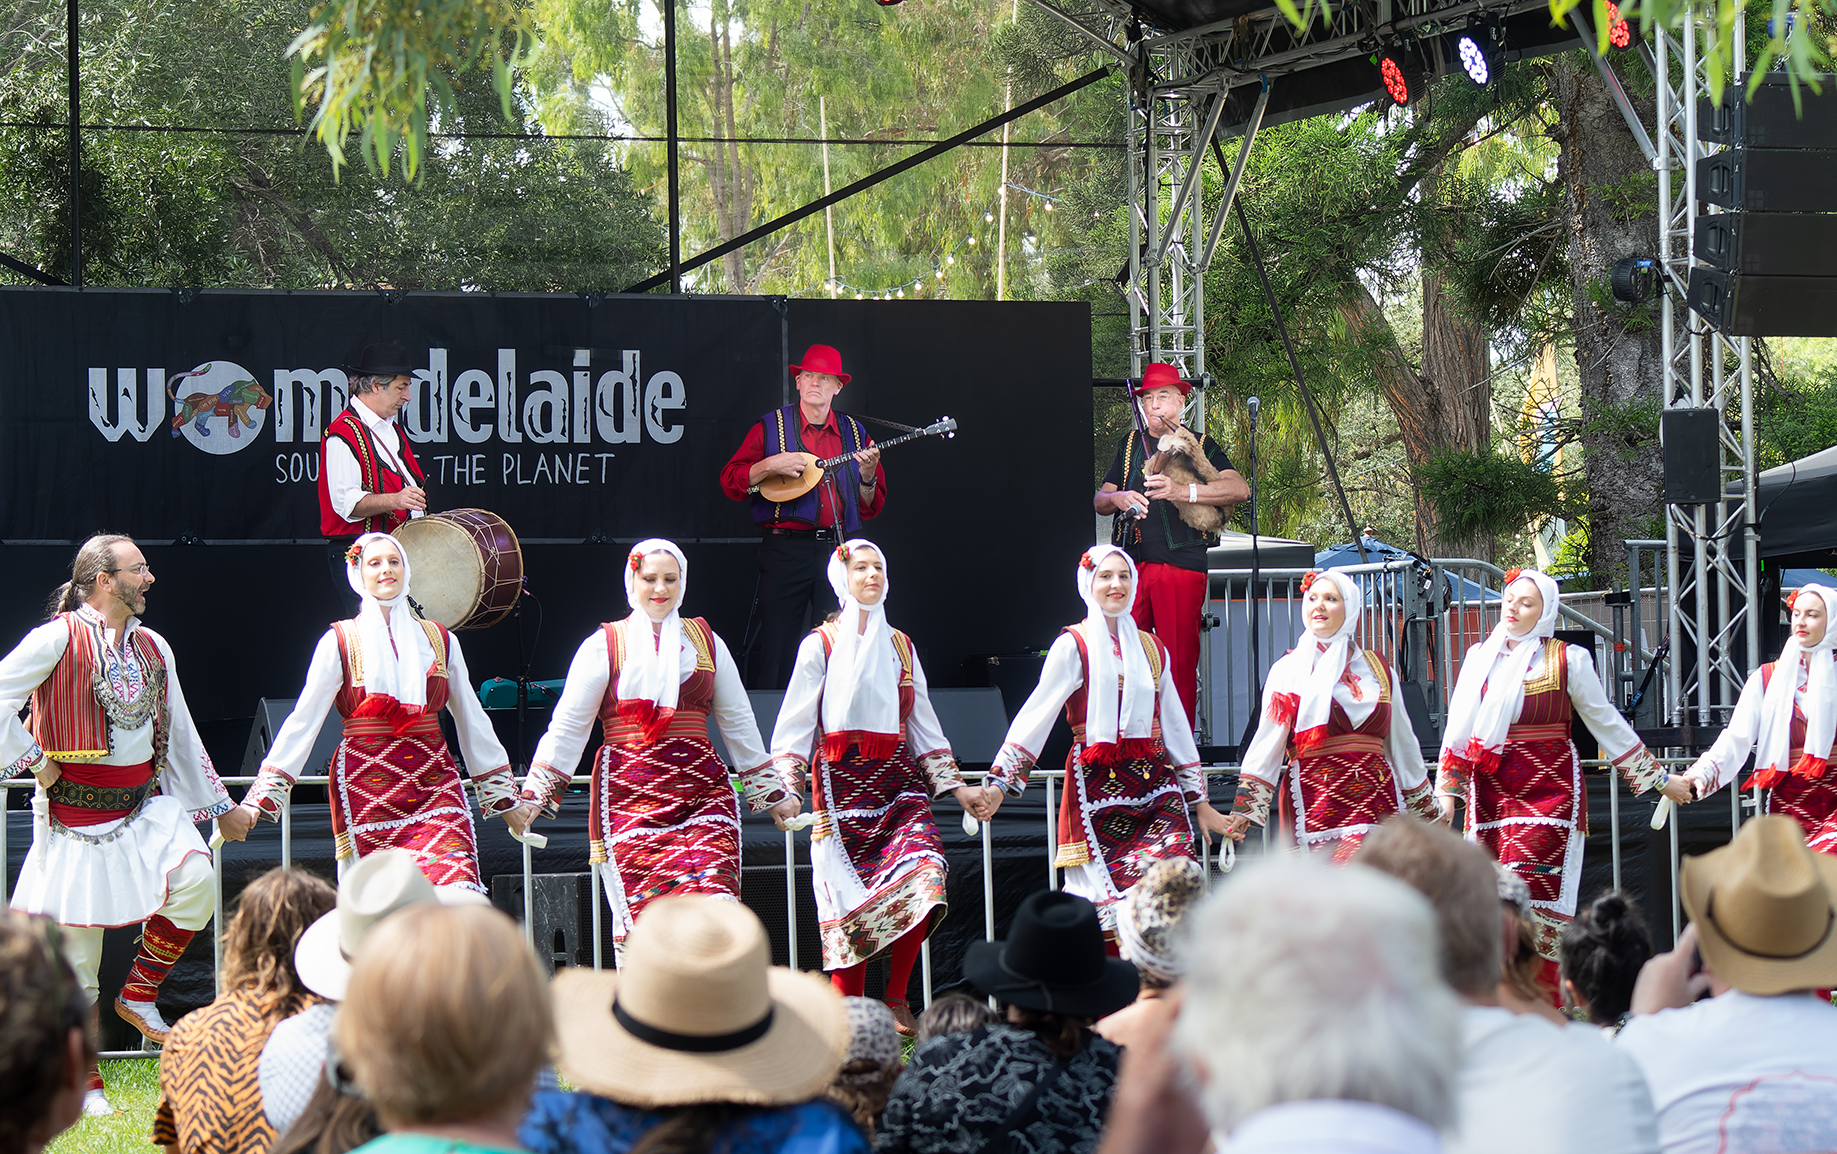 Gosti-dancers-womad-1.png